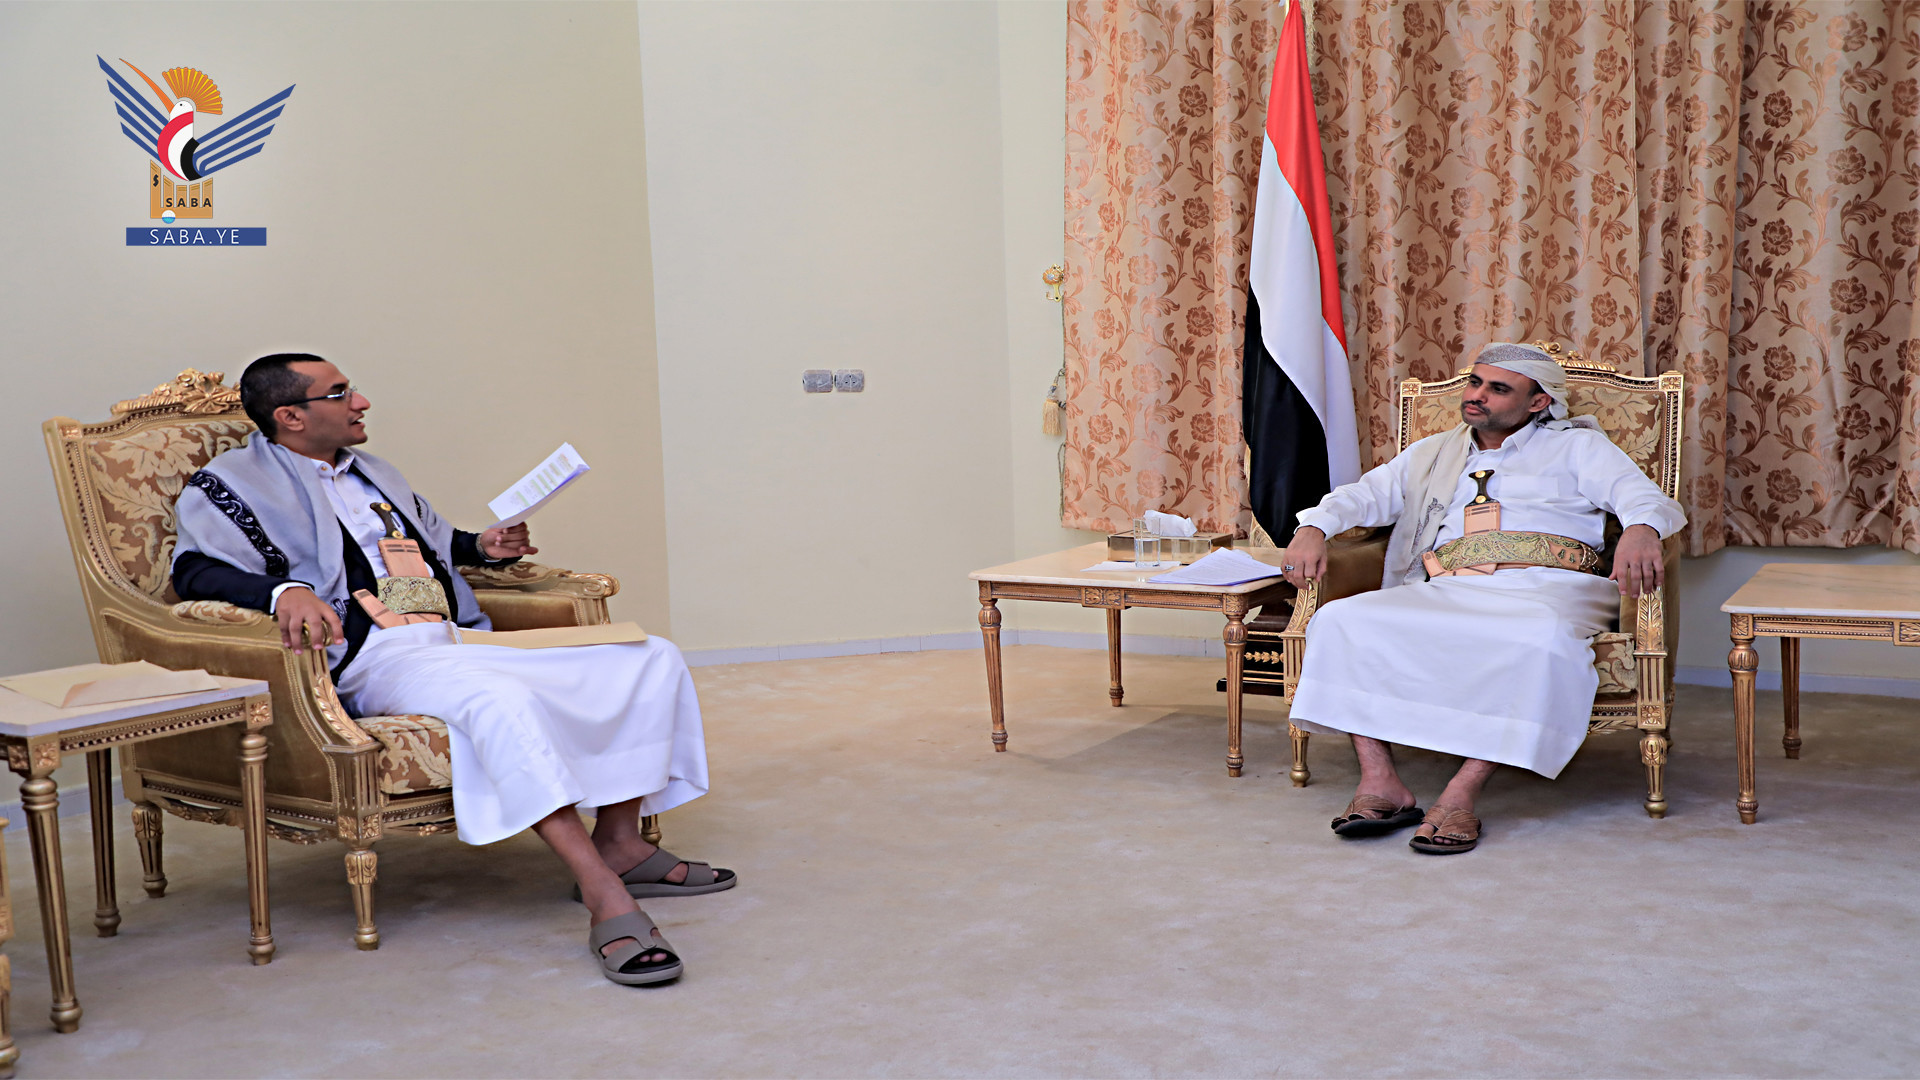 President Al-Mashat discusses with Civil Service Minister reforms implemented by Ministry